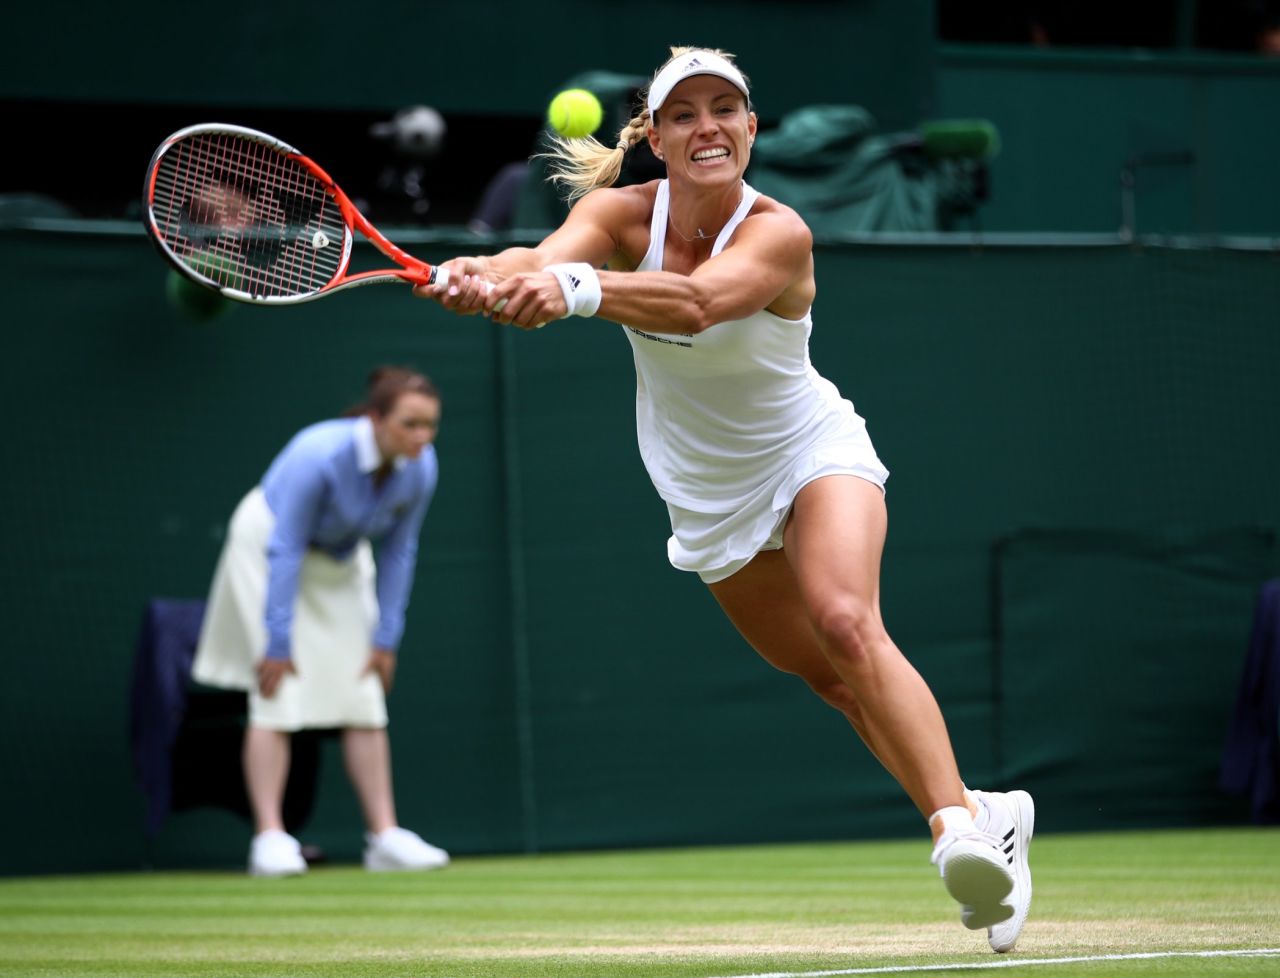 Kerber stretches to play a shot during the hotly-contested final on Centre Court. 